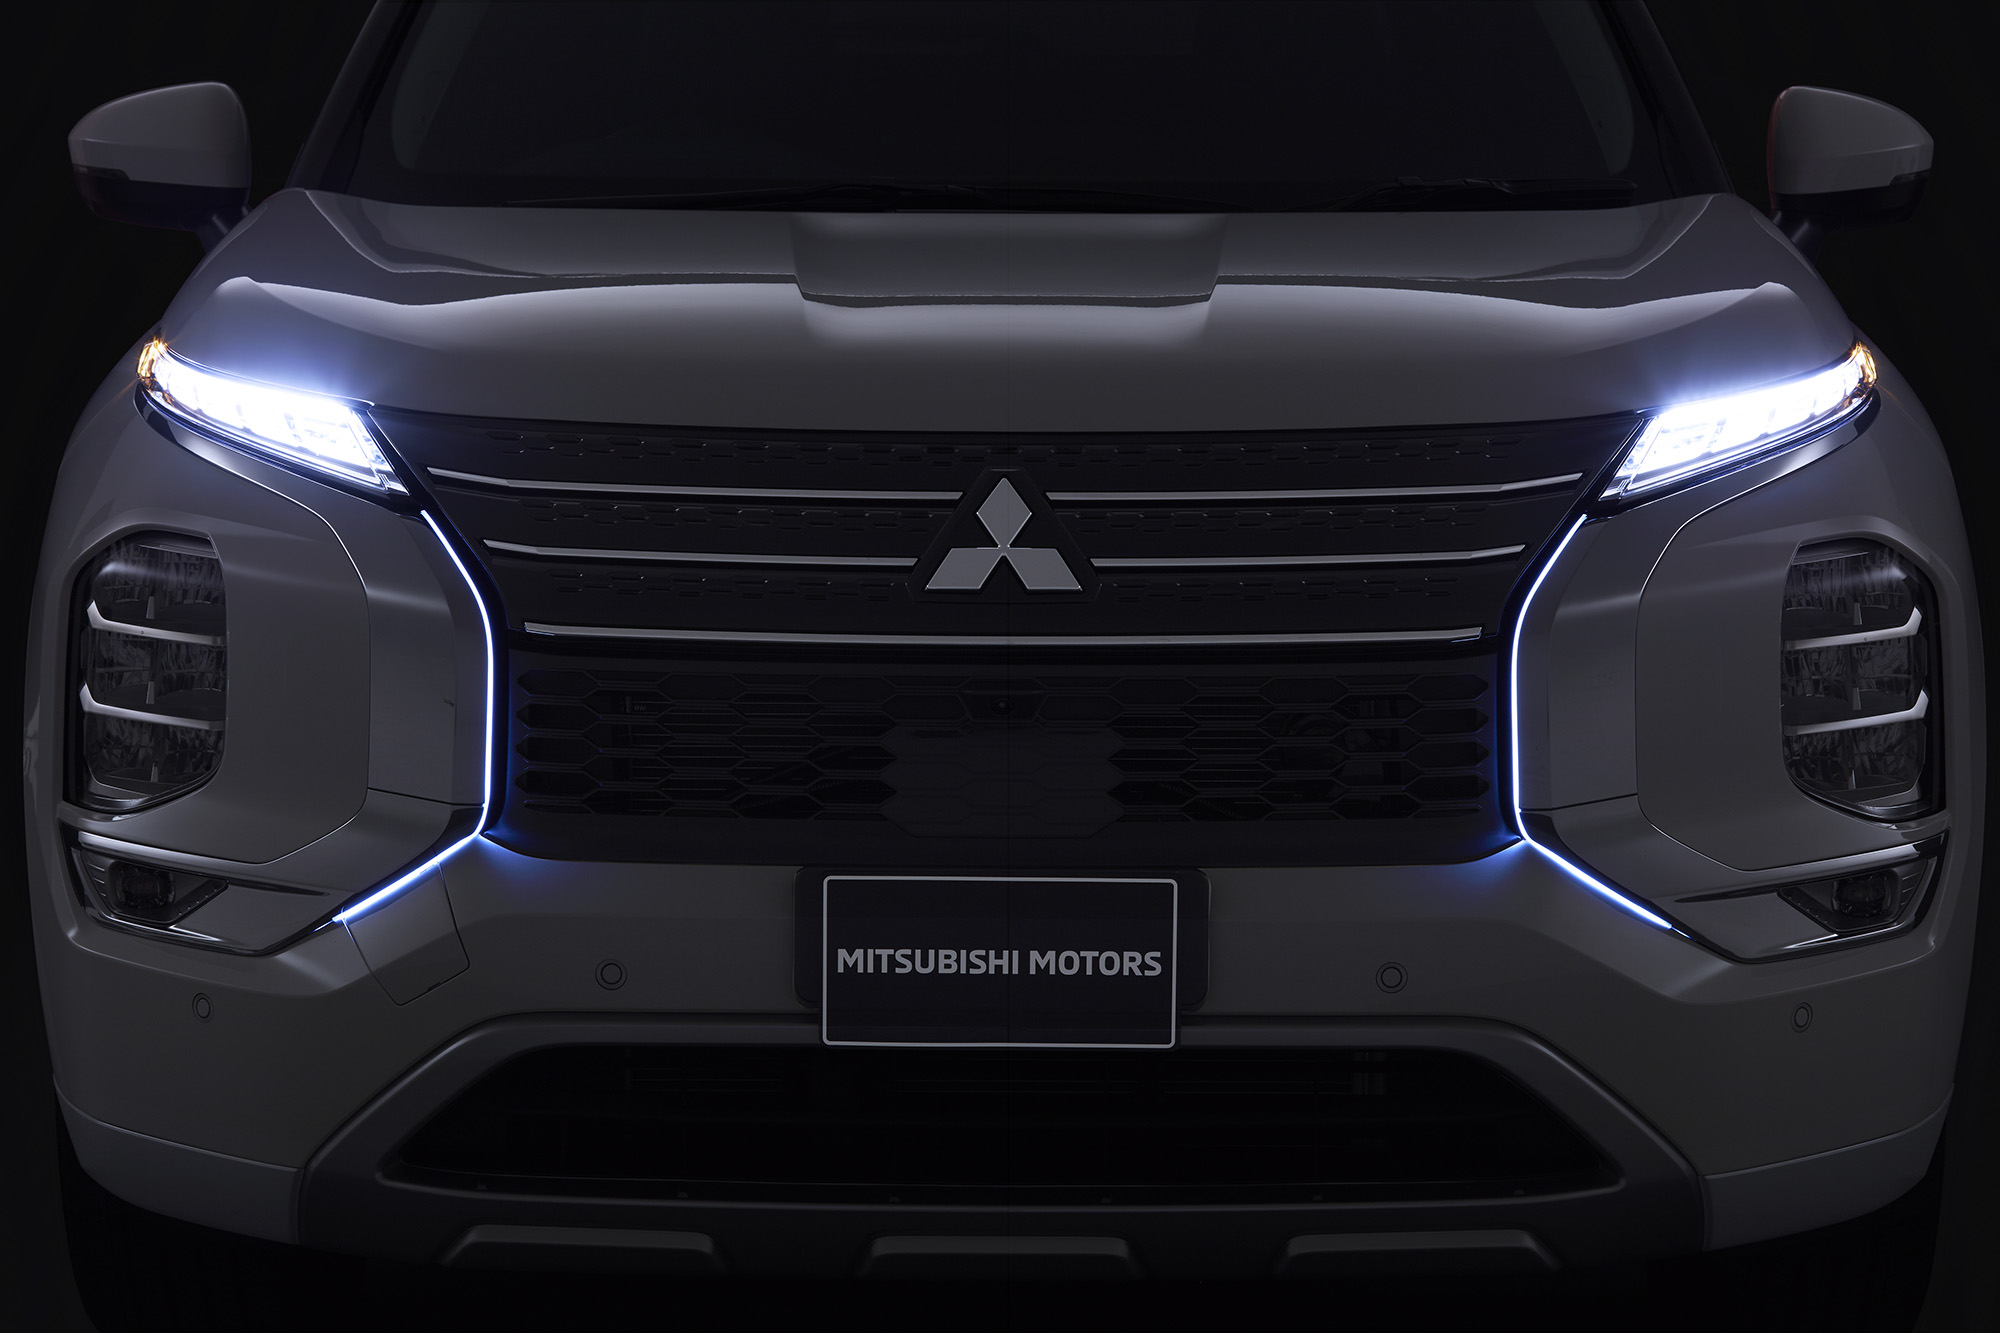 Outlander dynamic shield illumination with front grille lights